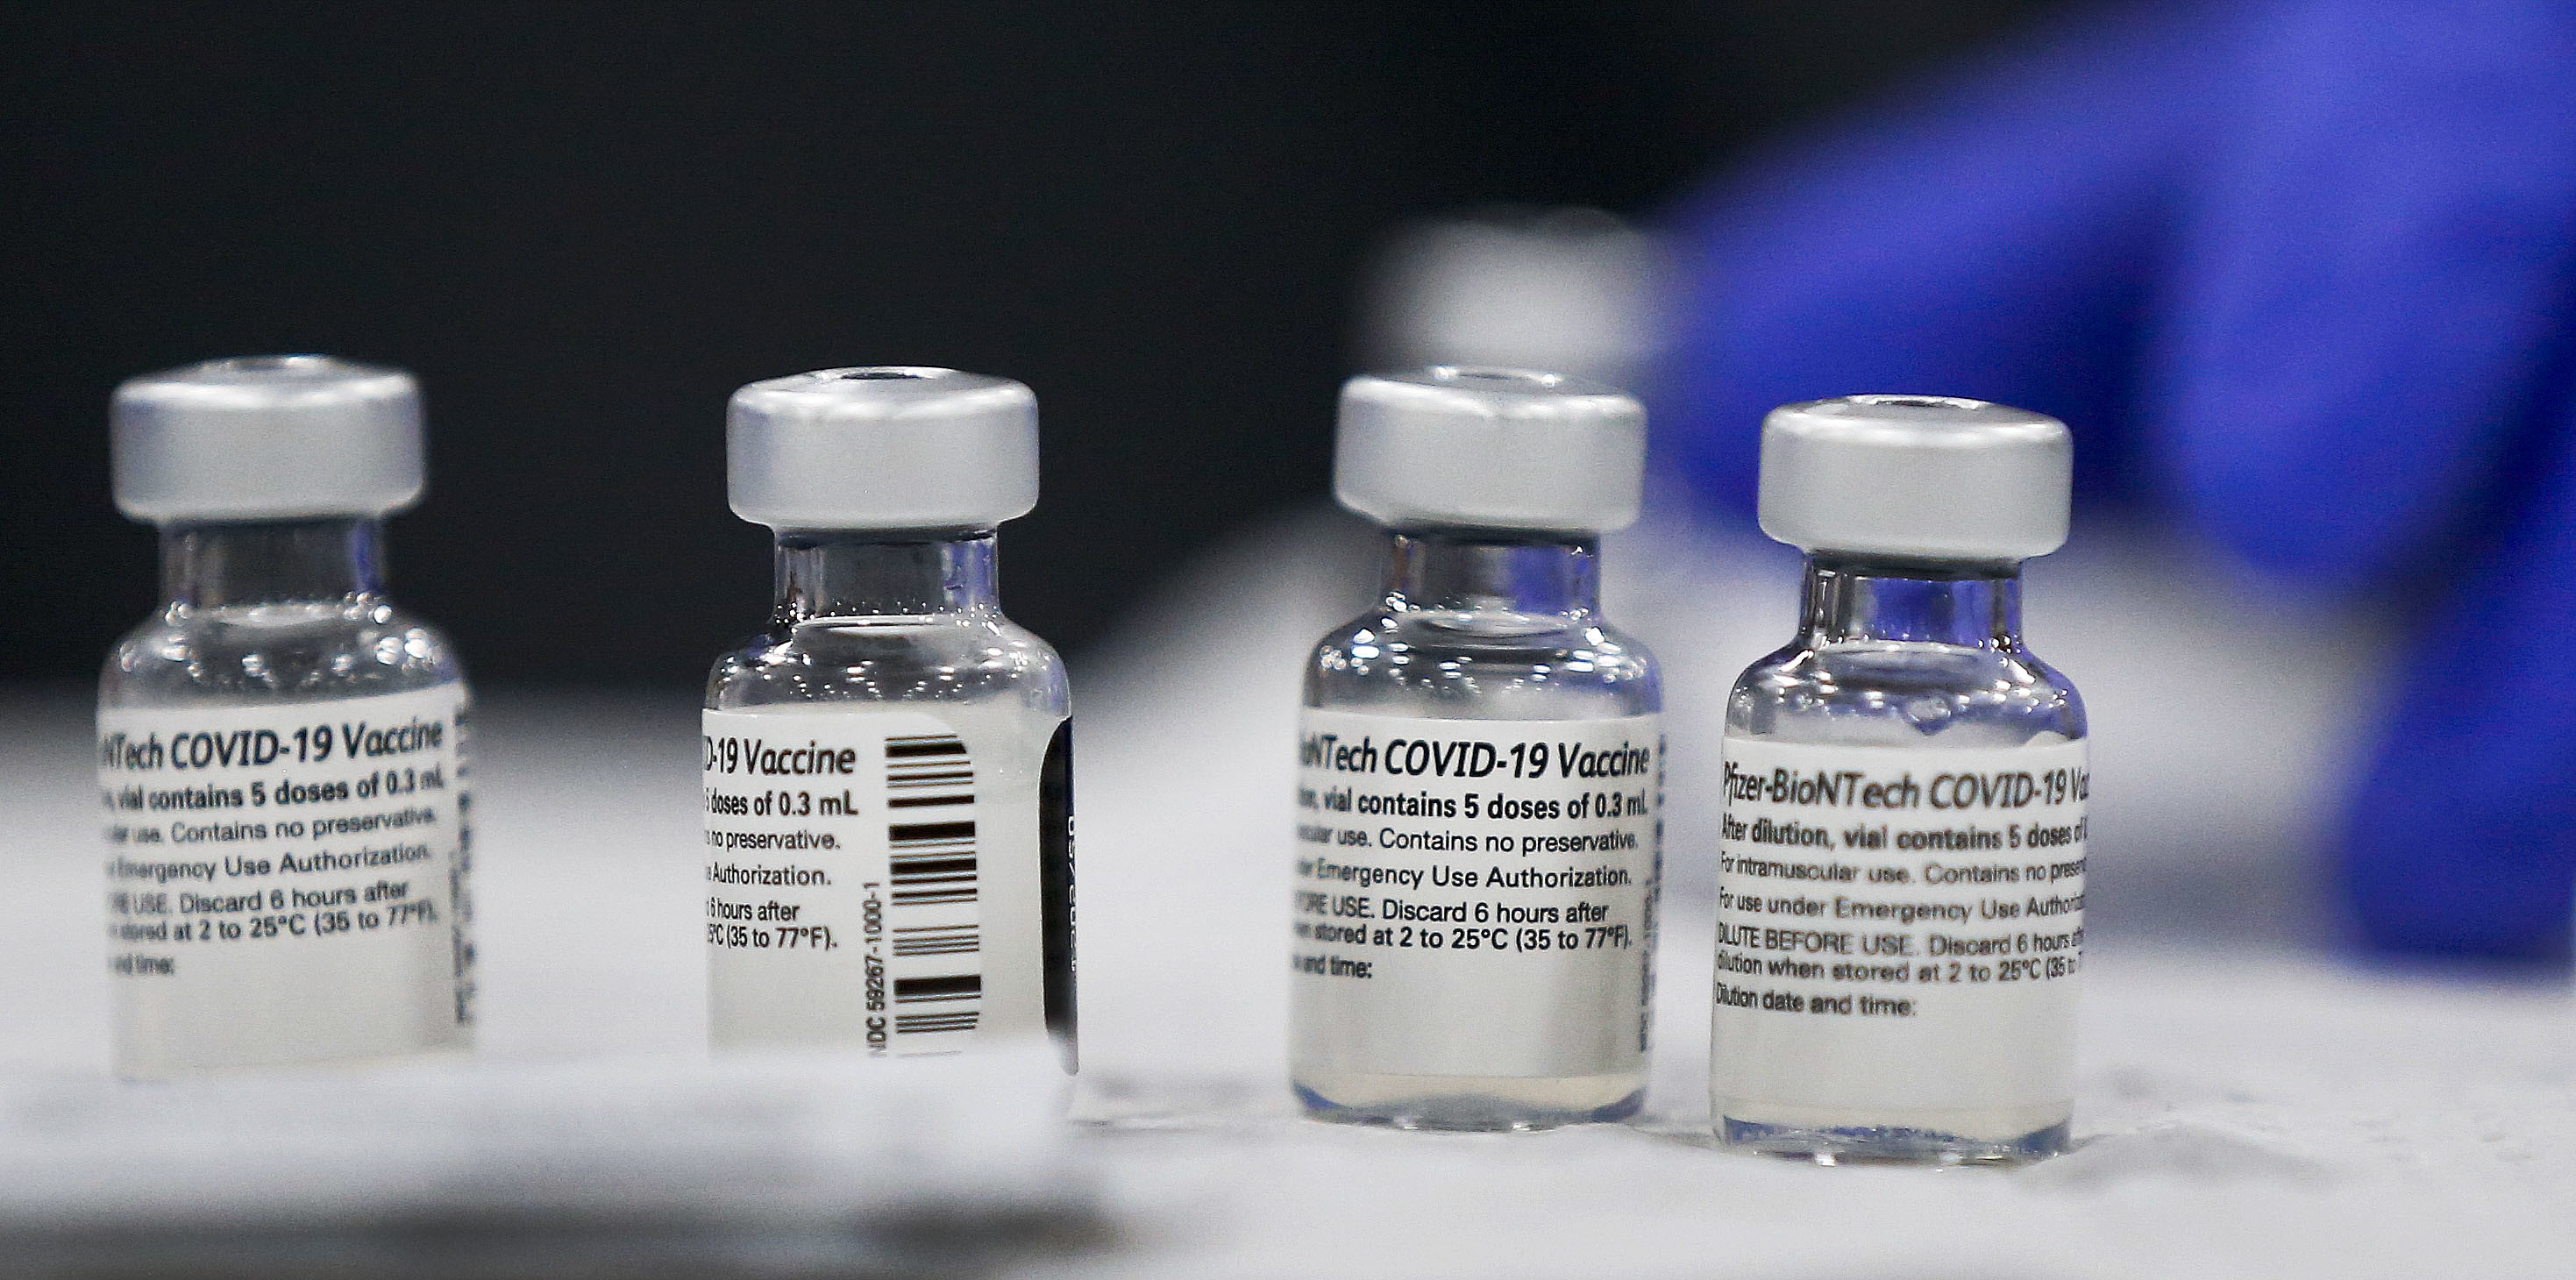 Vials containing the Pfizer-BioNTech COVID-19 vaccine in Utah.